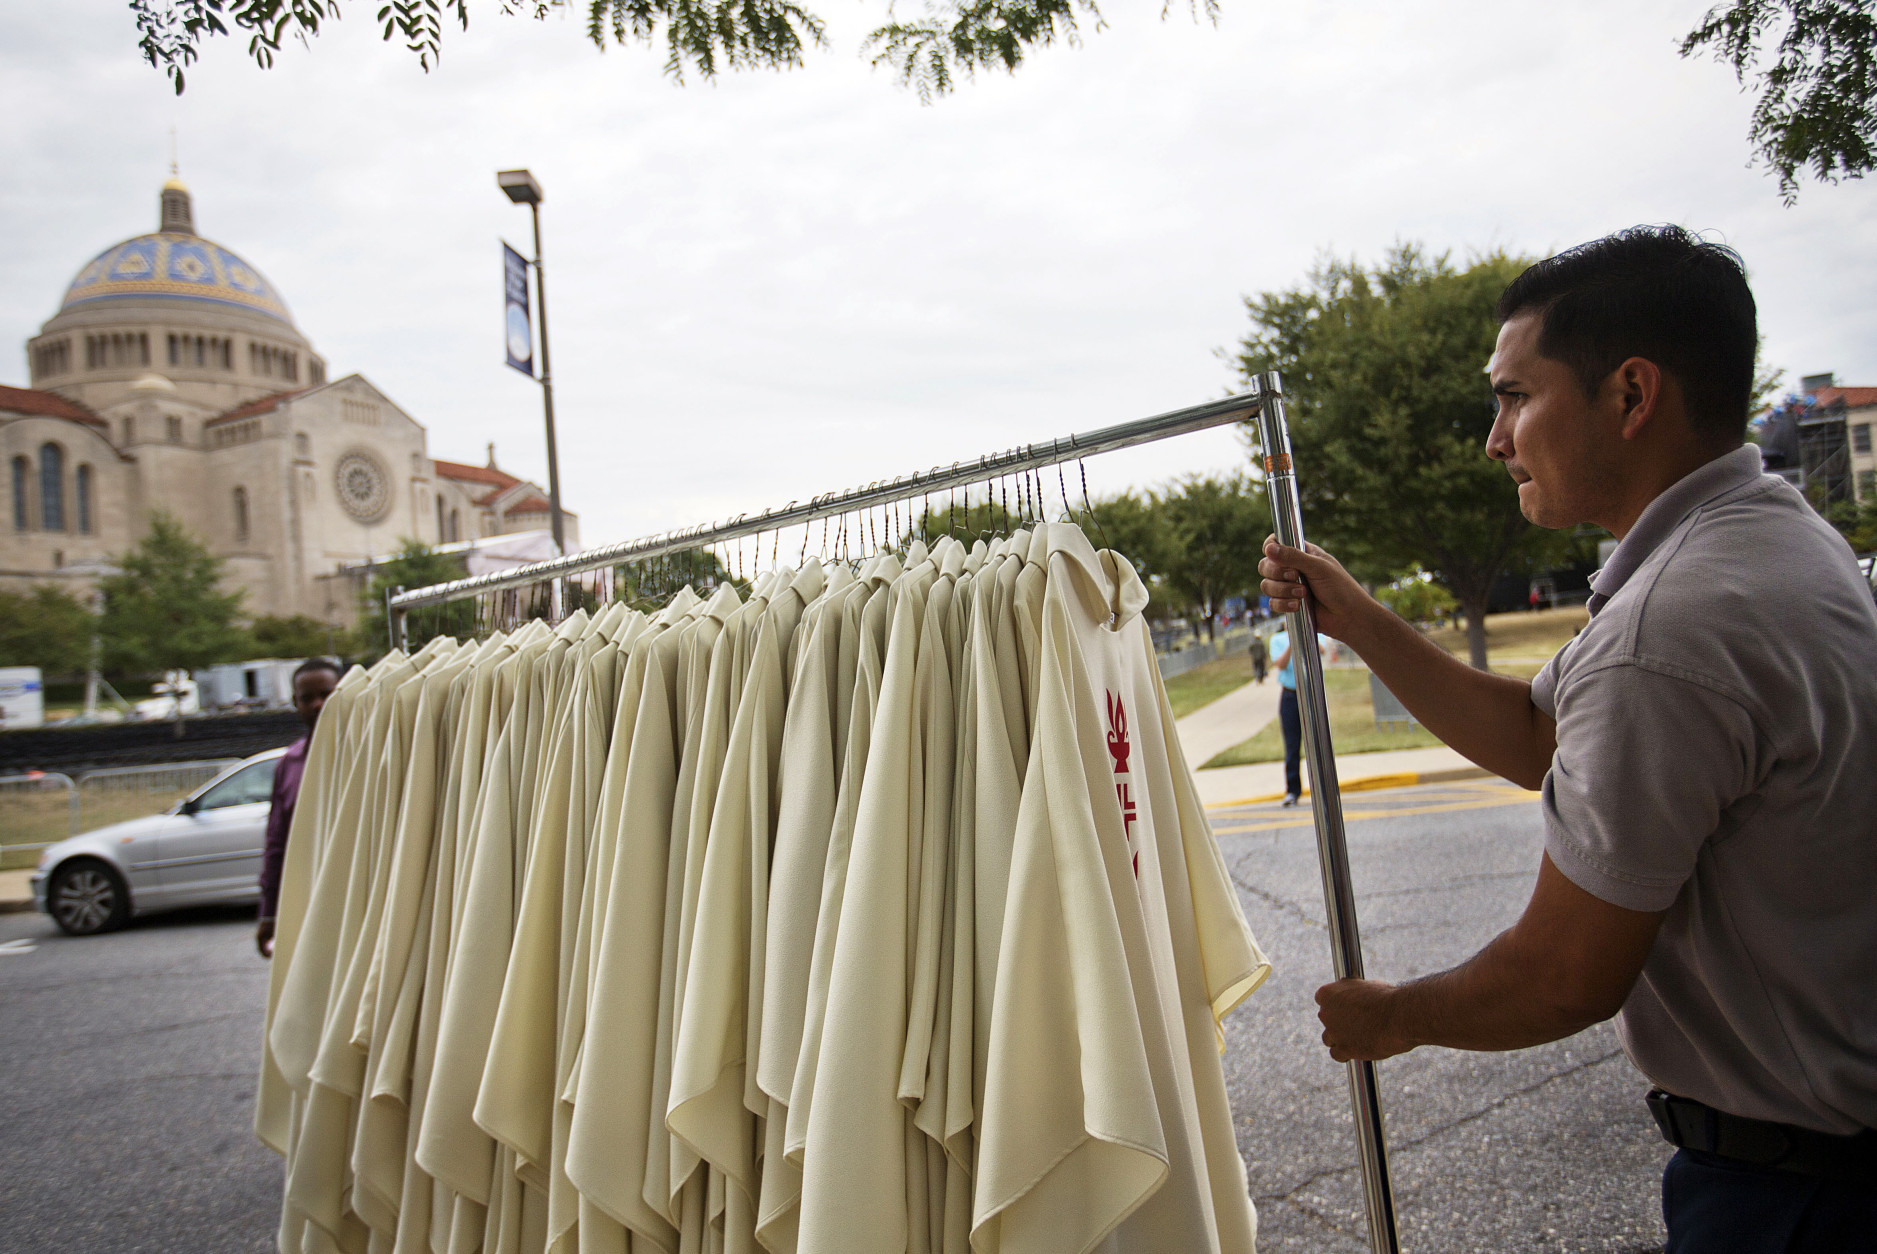 A worker pulls a rack of vestments to be worn by priests at Wednesday's Mass with Pope Francis during preparations at the Basilica of the National Shrine of the Immaculate Conception, rear, Monday, Sept. 21, 2015, in Washington. Pope Francis will celebrate Mass Wednesday at the basilica, the largest Catholic church in the United States and North America, with a crowd of about 30,000. (AP Photo/David Goldman)